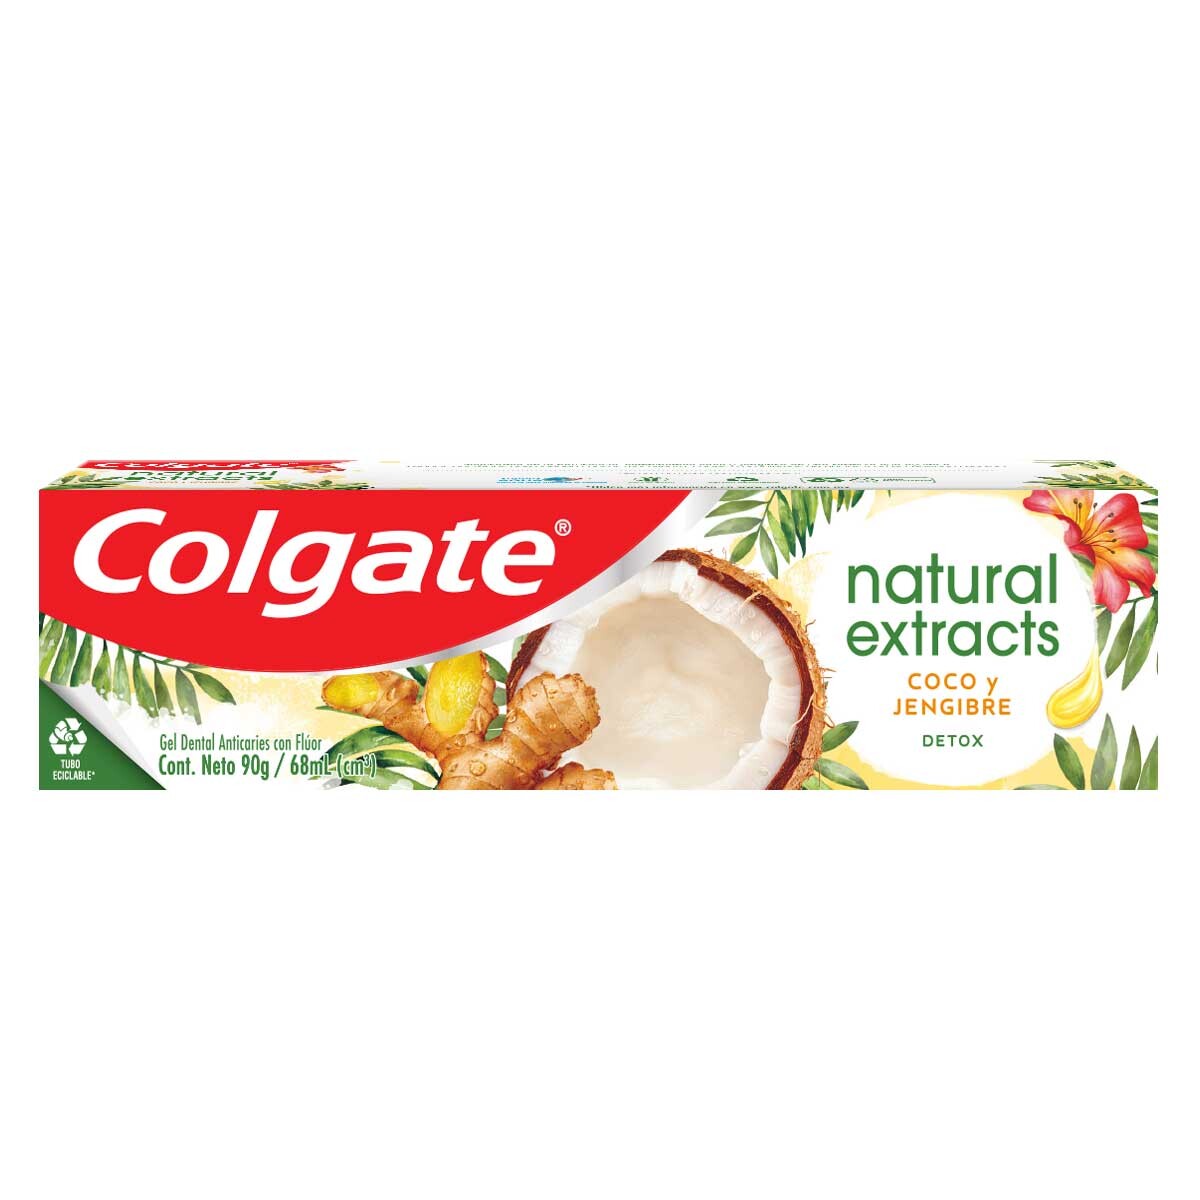 Pasta Dental Colgate Natural Extracts Coco y Jengibre 90 GR 